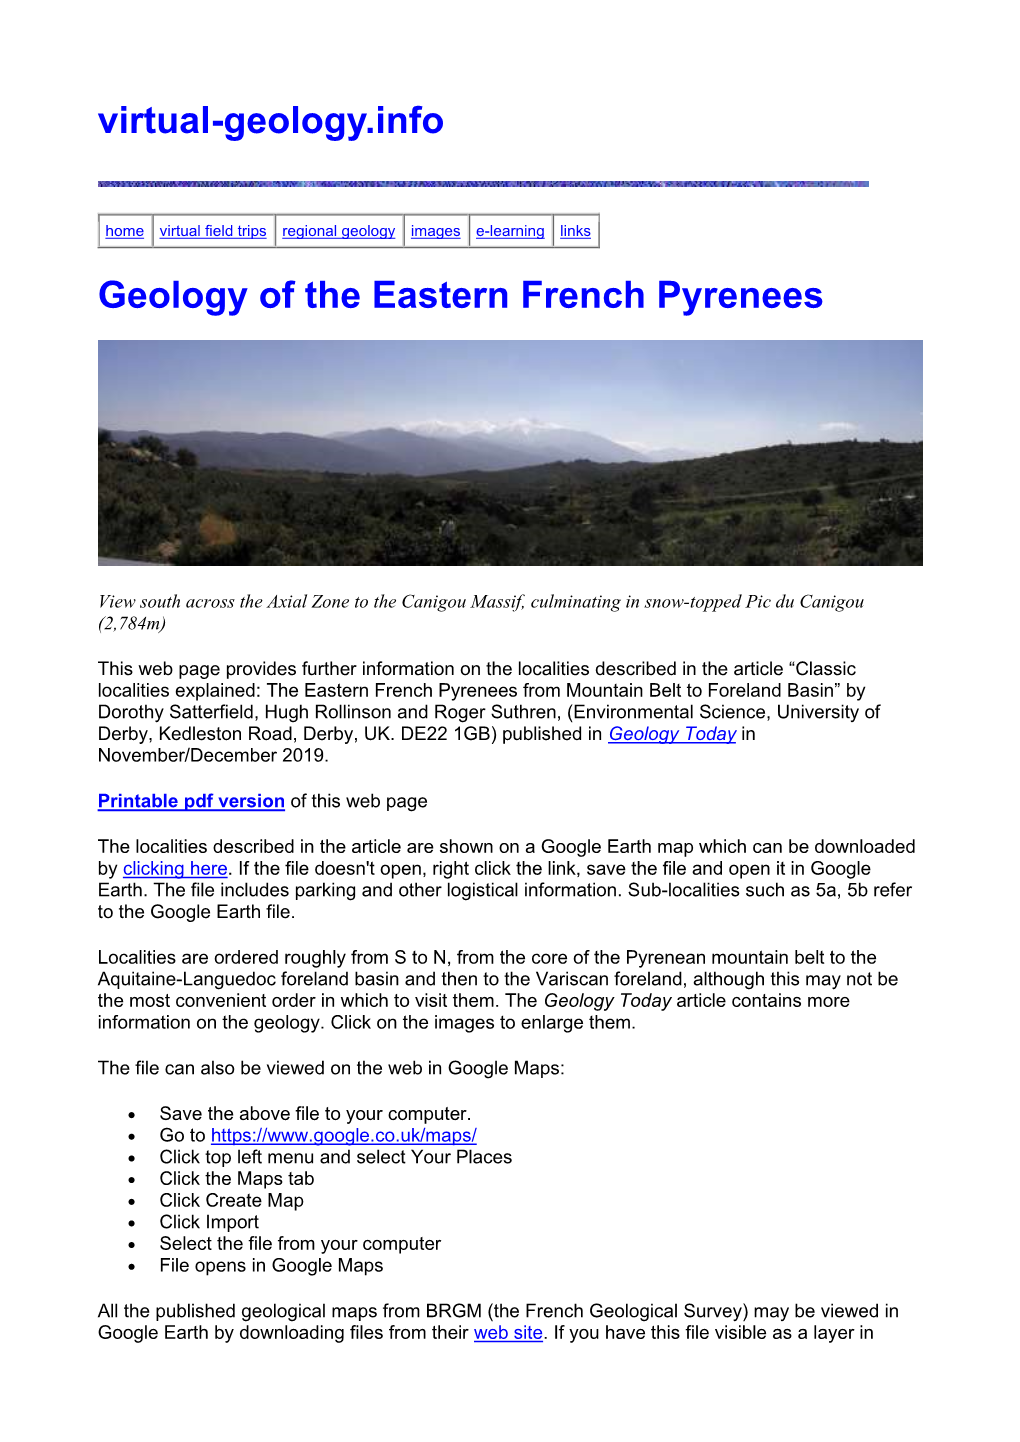 Geology of the Eastern French Pyrenees